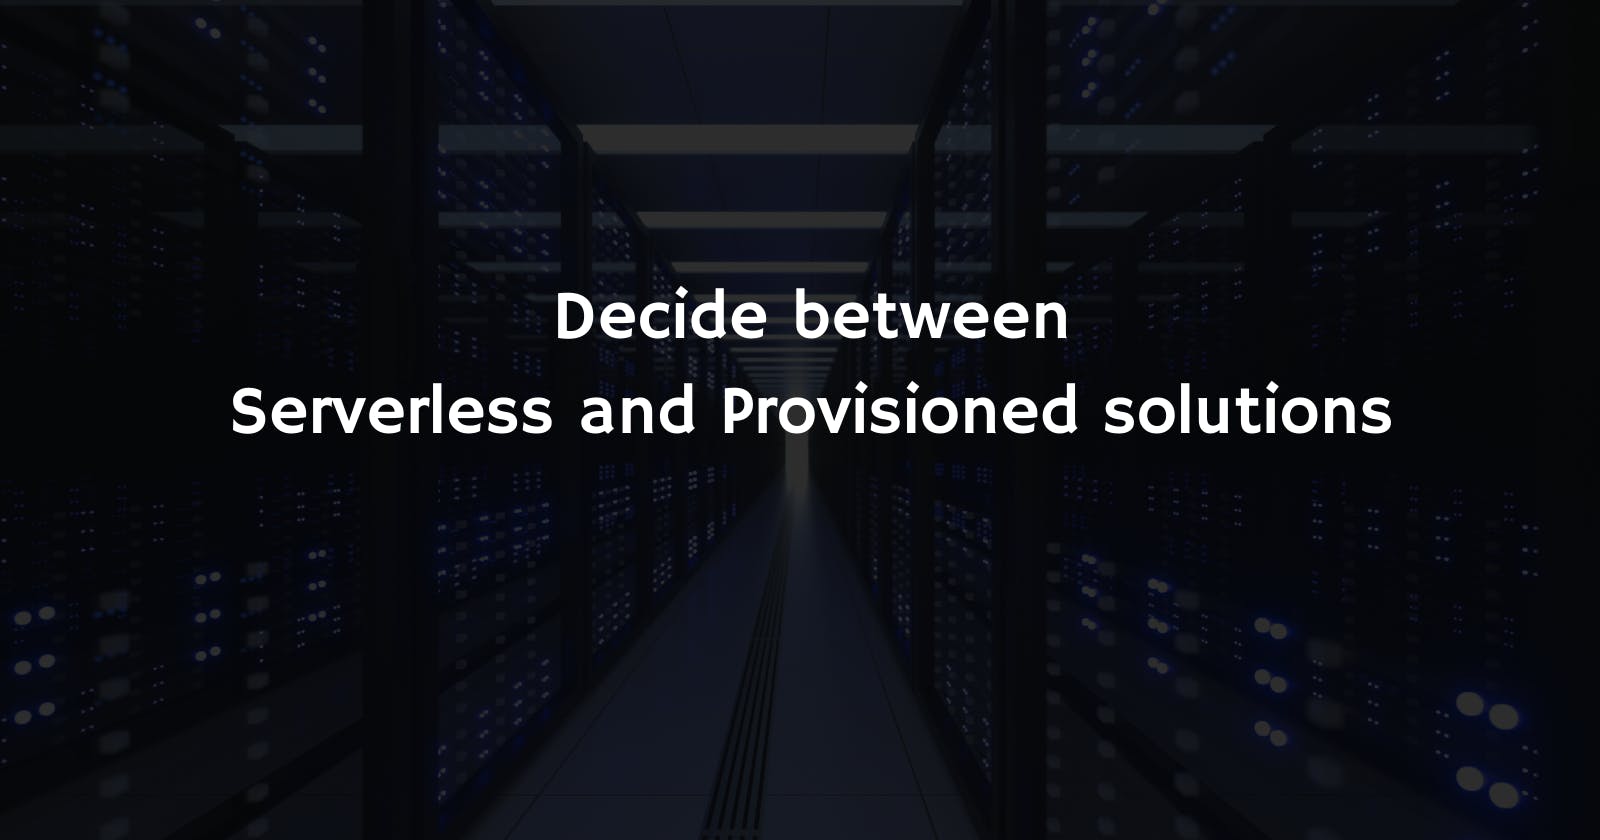 How to decide if serverless is right for you?